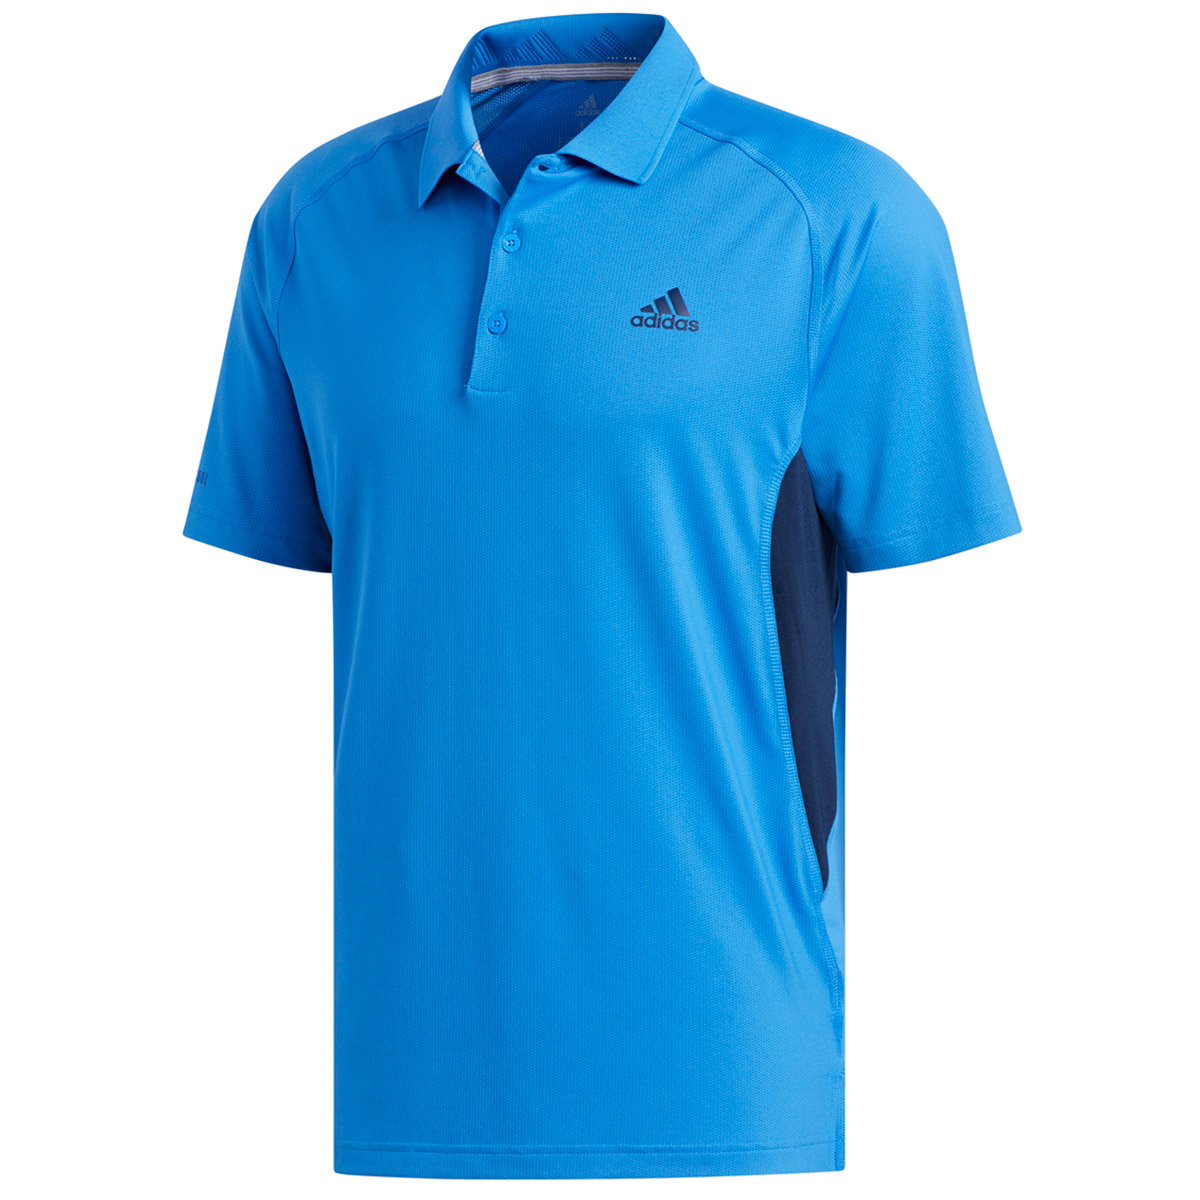 adidas Golf Ultimate 365 Climacool Solid Polo Shirt from american golf